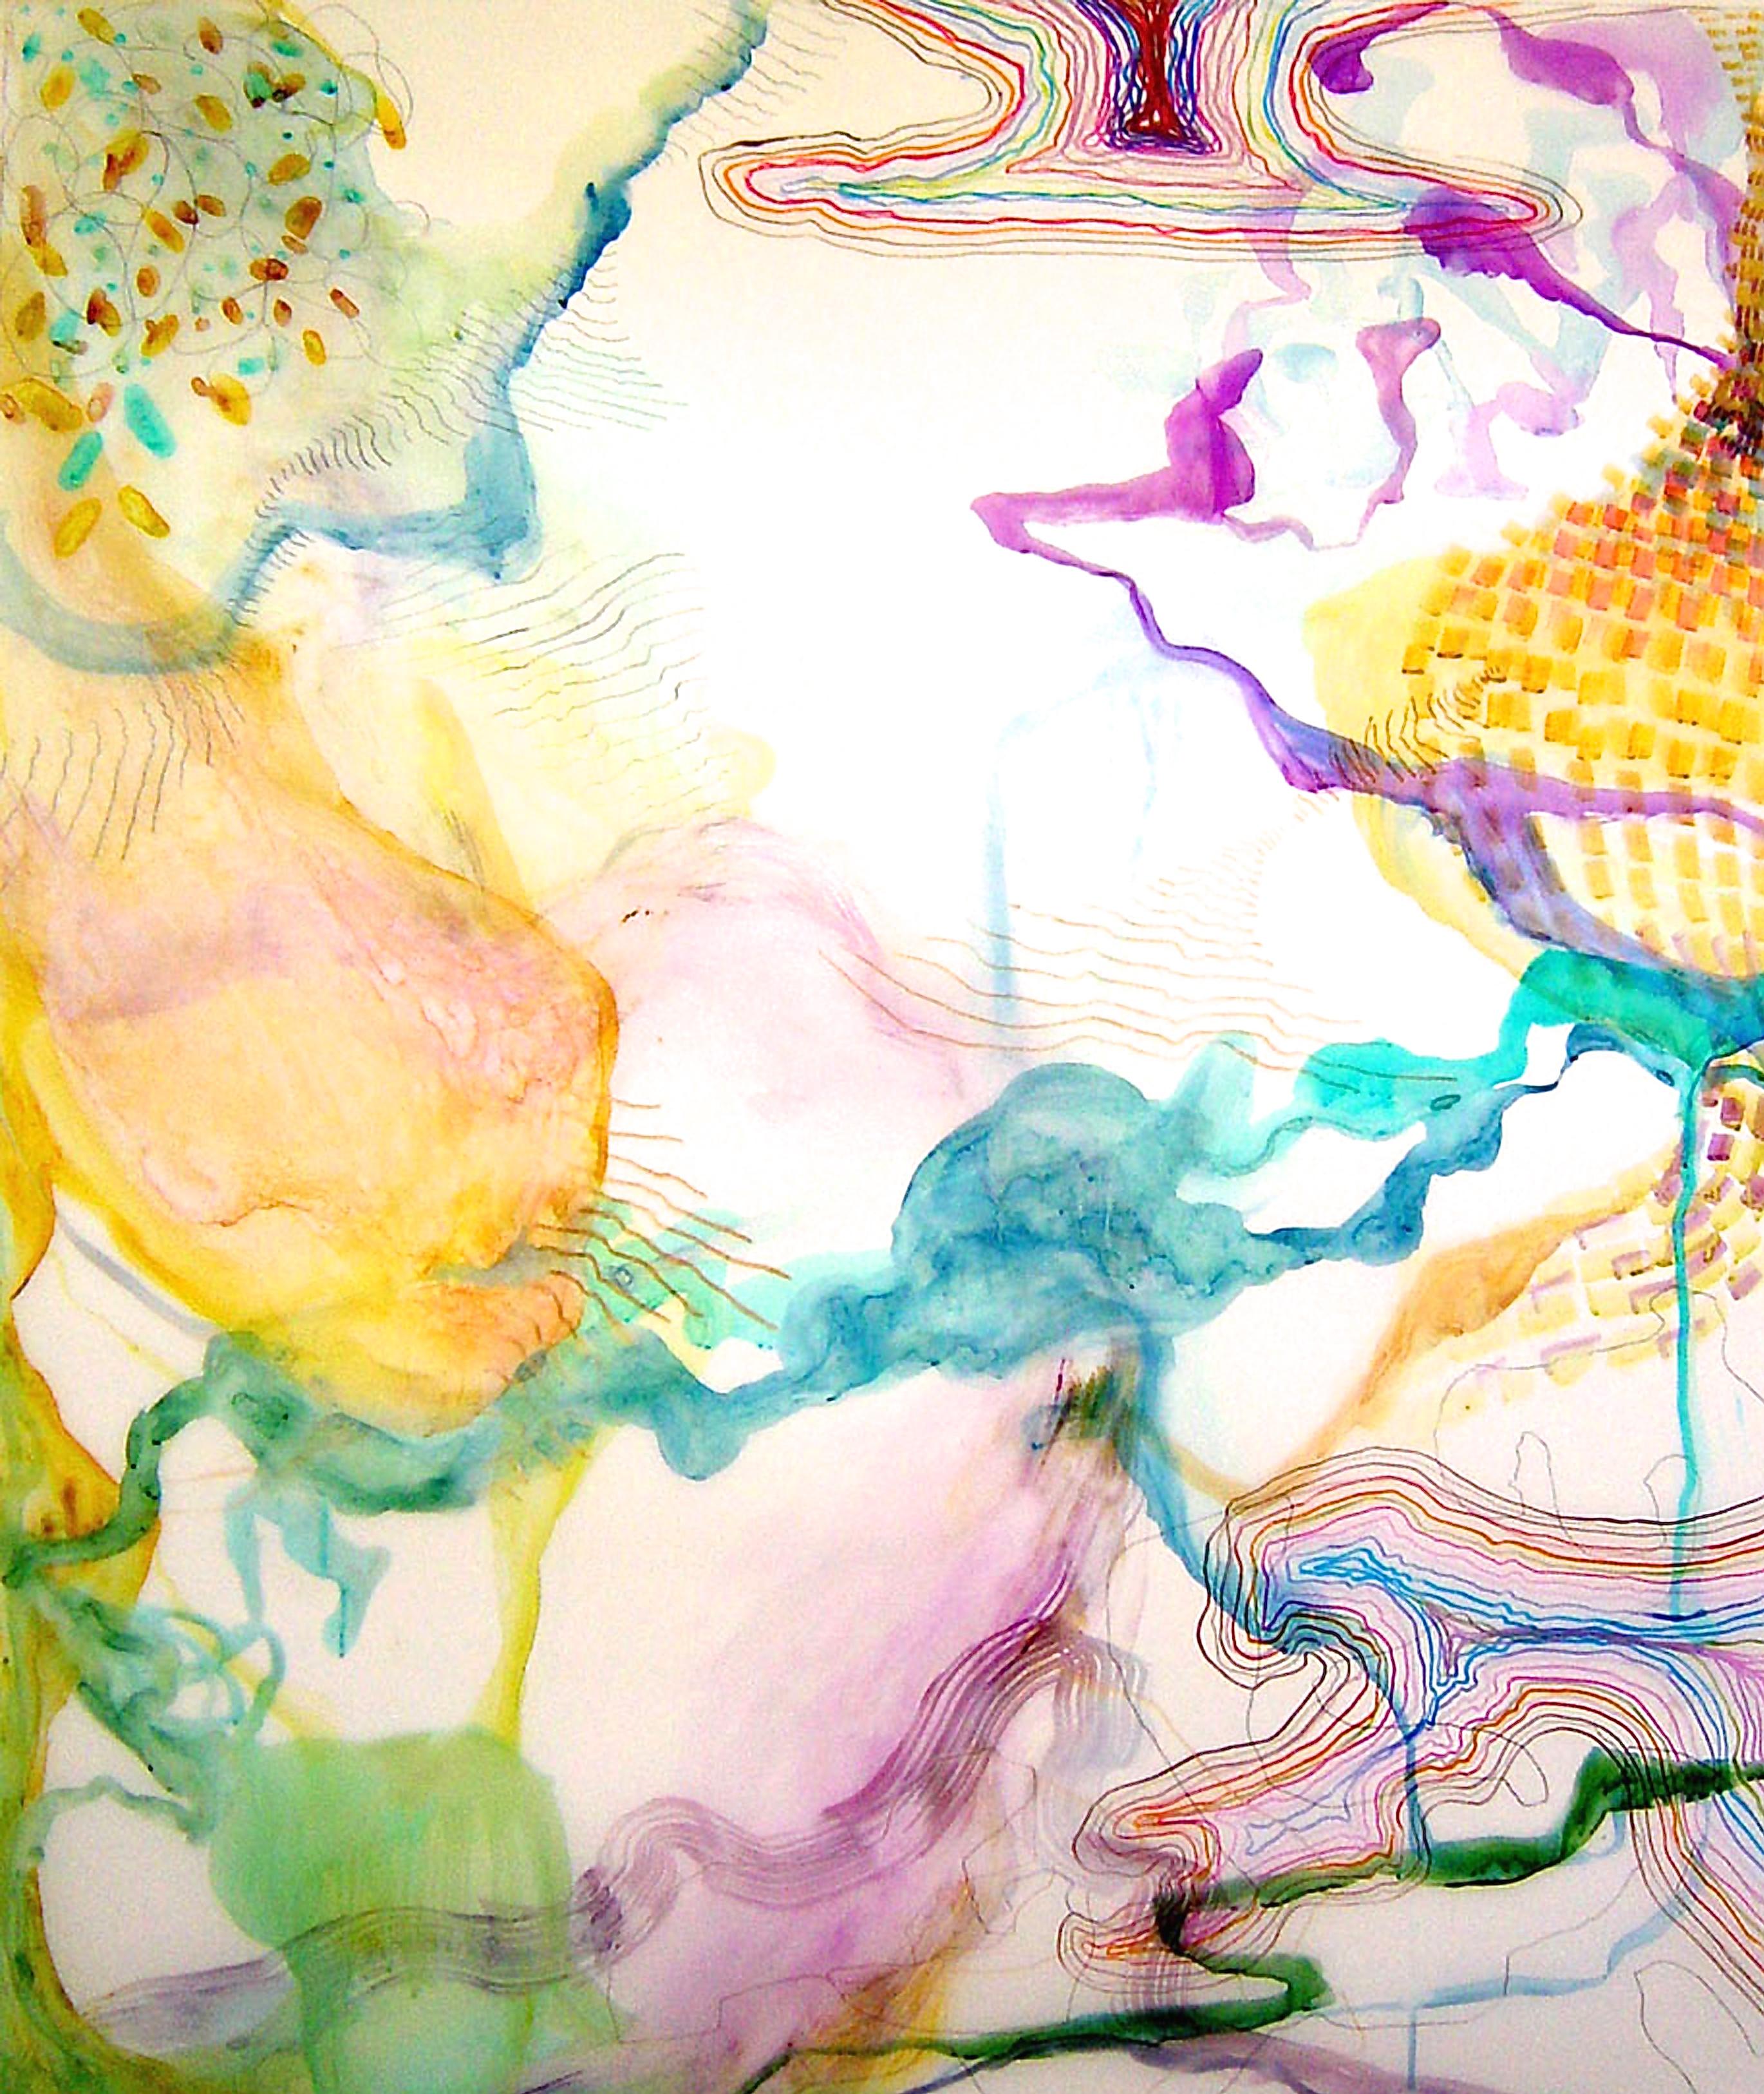 Susan Sharp Abstract Drawing - "Trace #12"  Large fluid abstraction, colorful, purple, yellow, turquoise, green